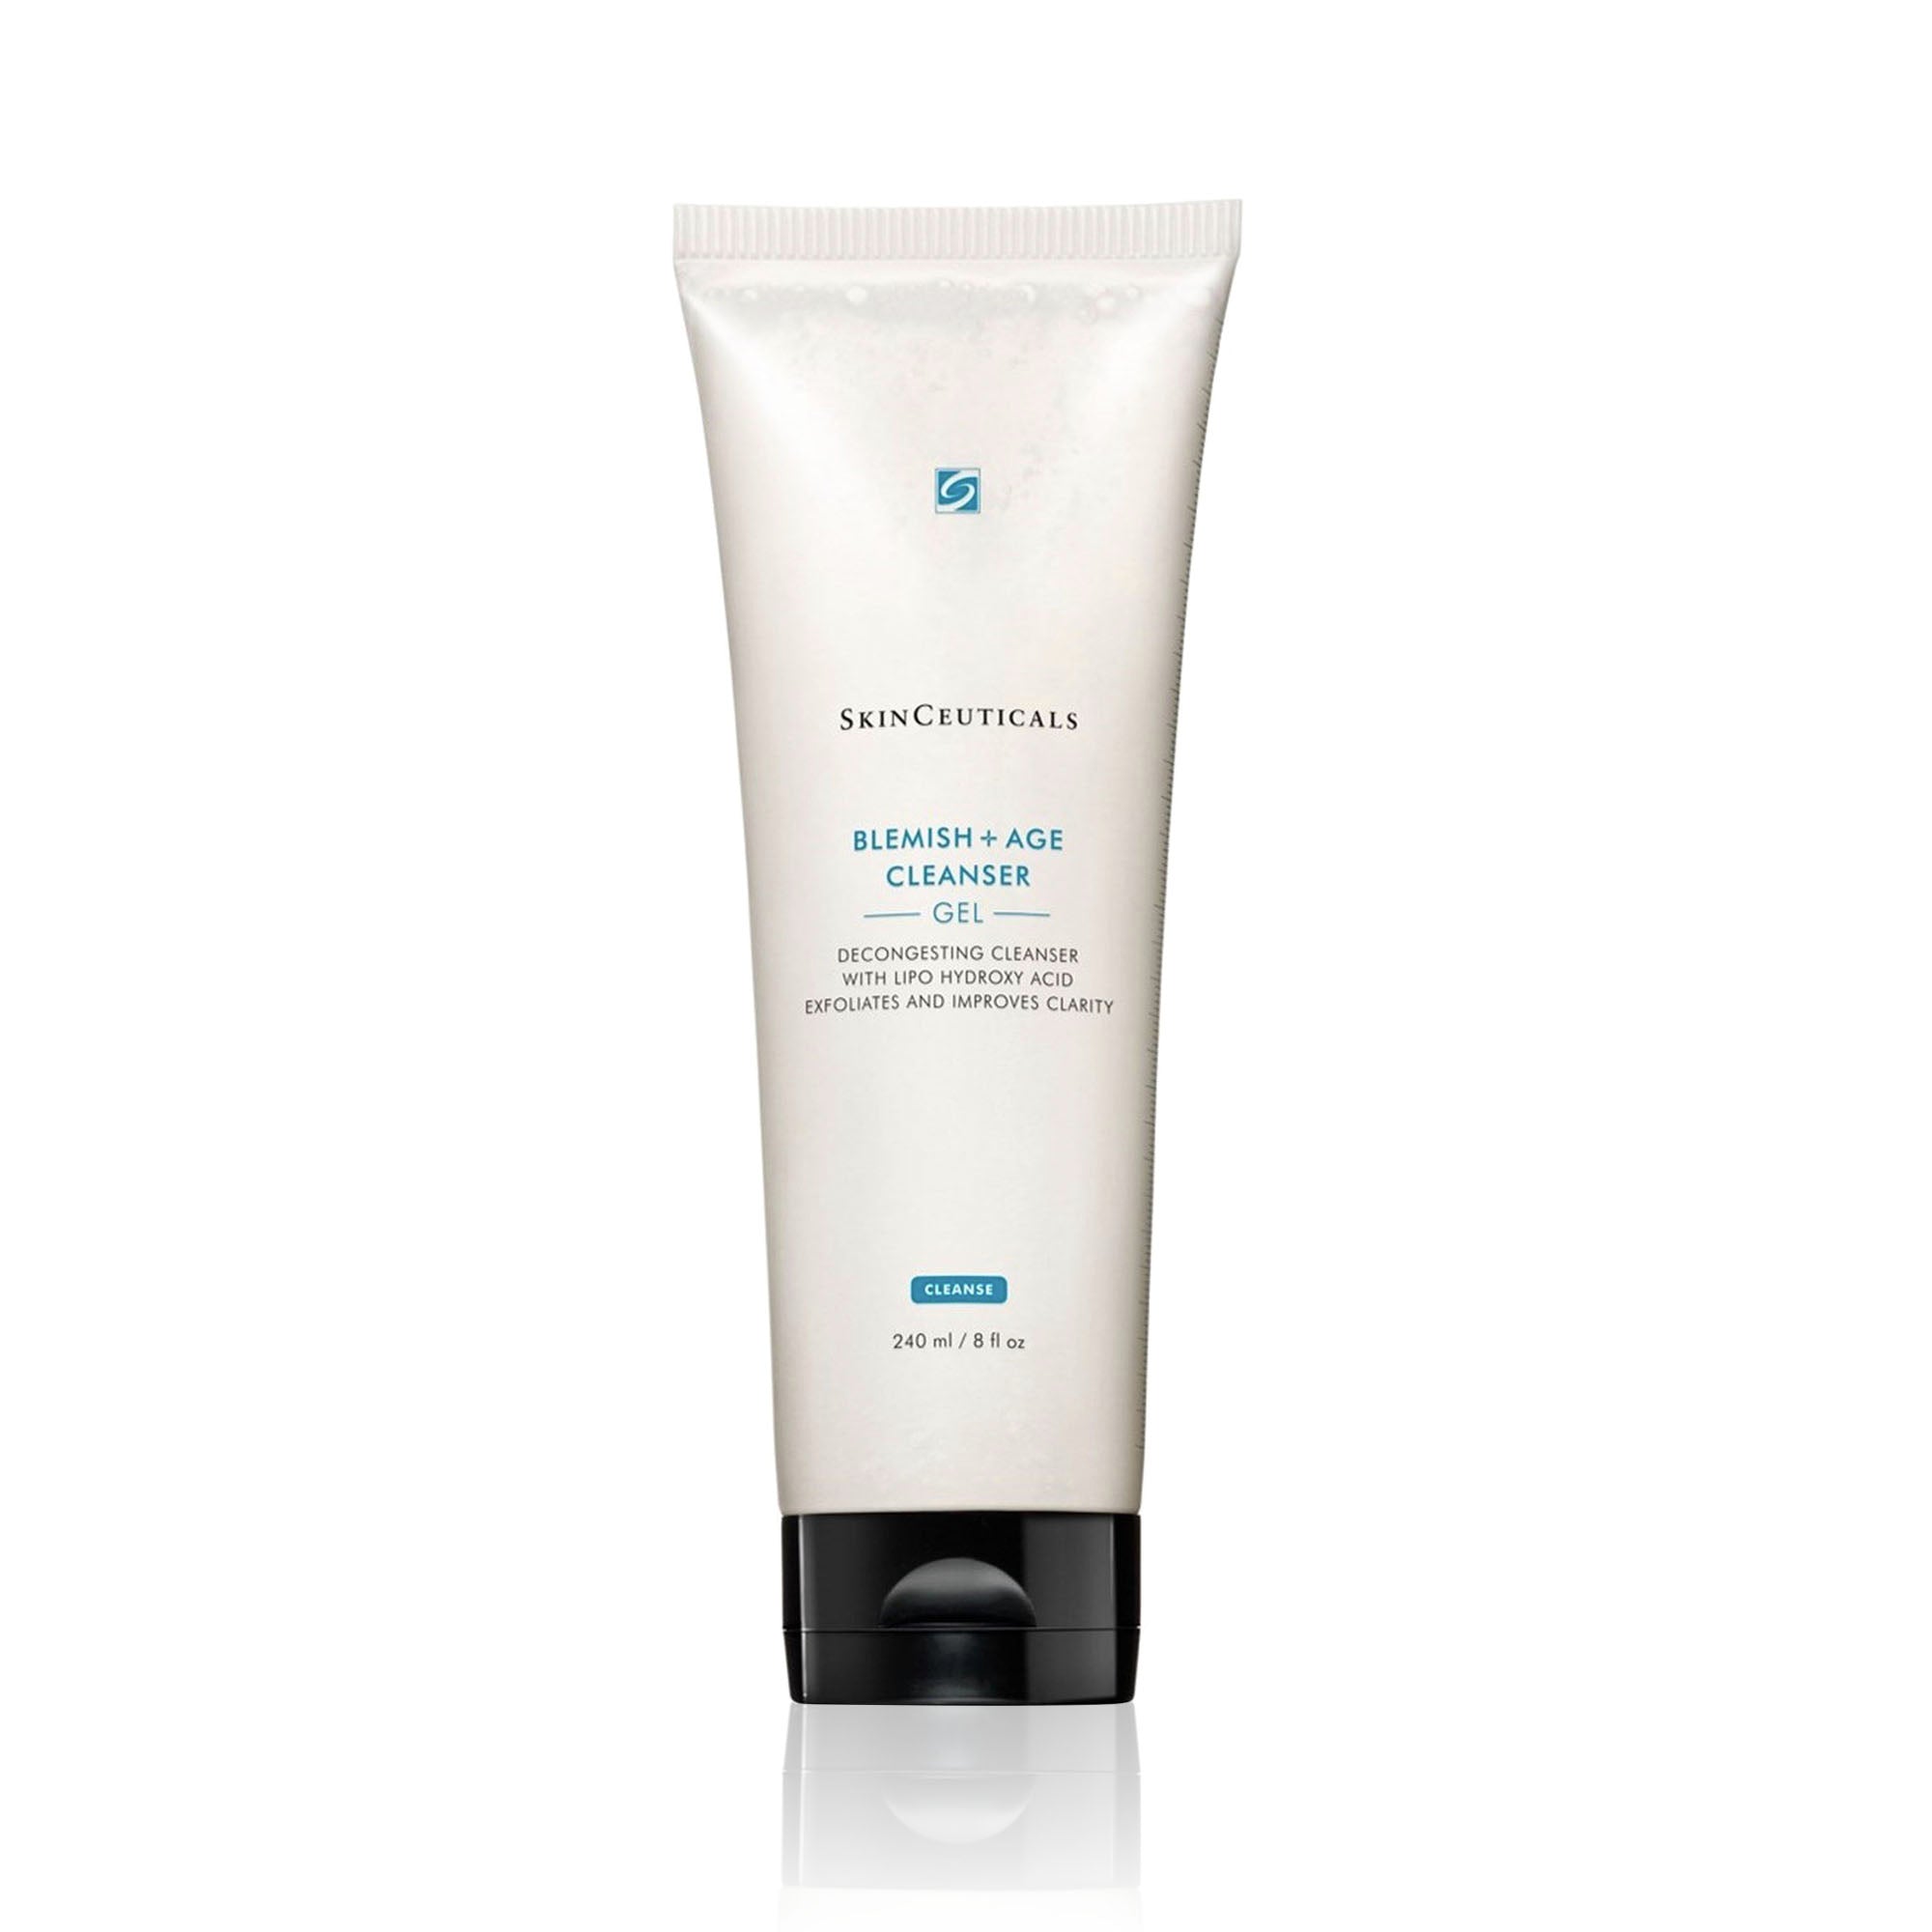 SkinCeuticals Purifying and Regenerating Double Action Cleansing Gel | BLEMISH + AGE CLEANSER 240ml